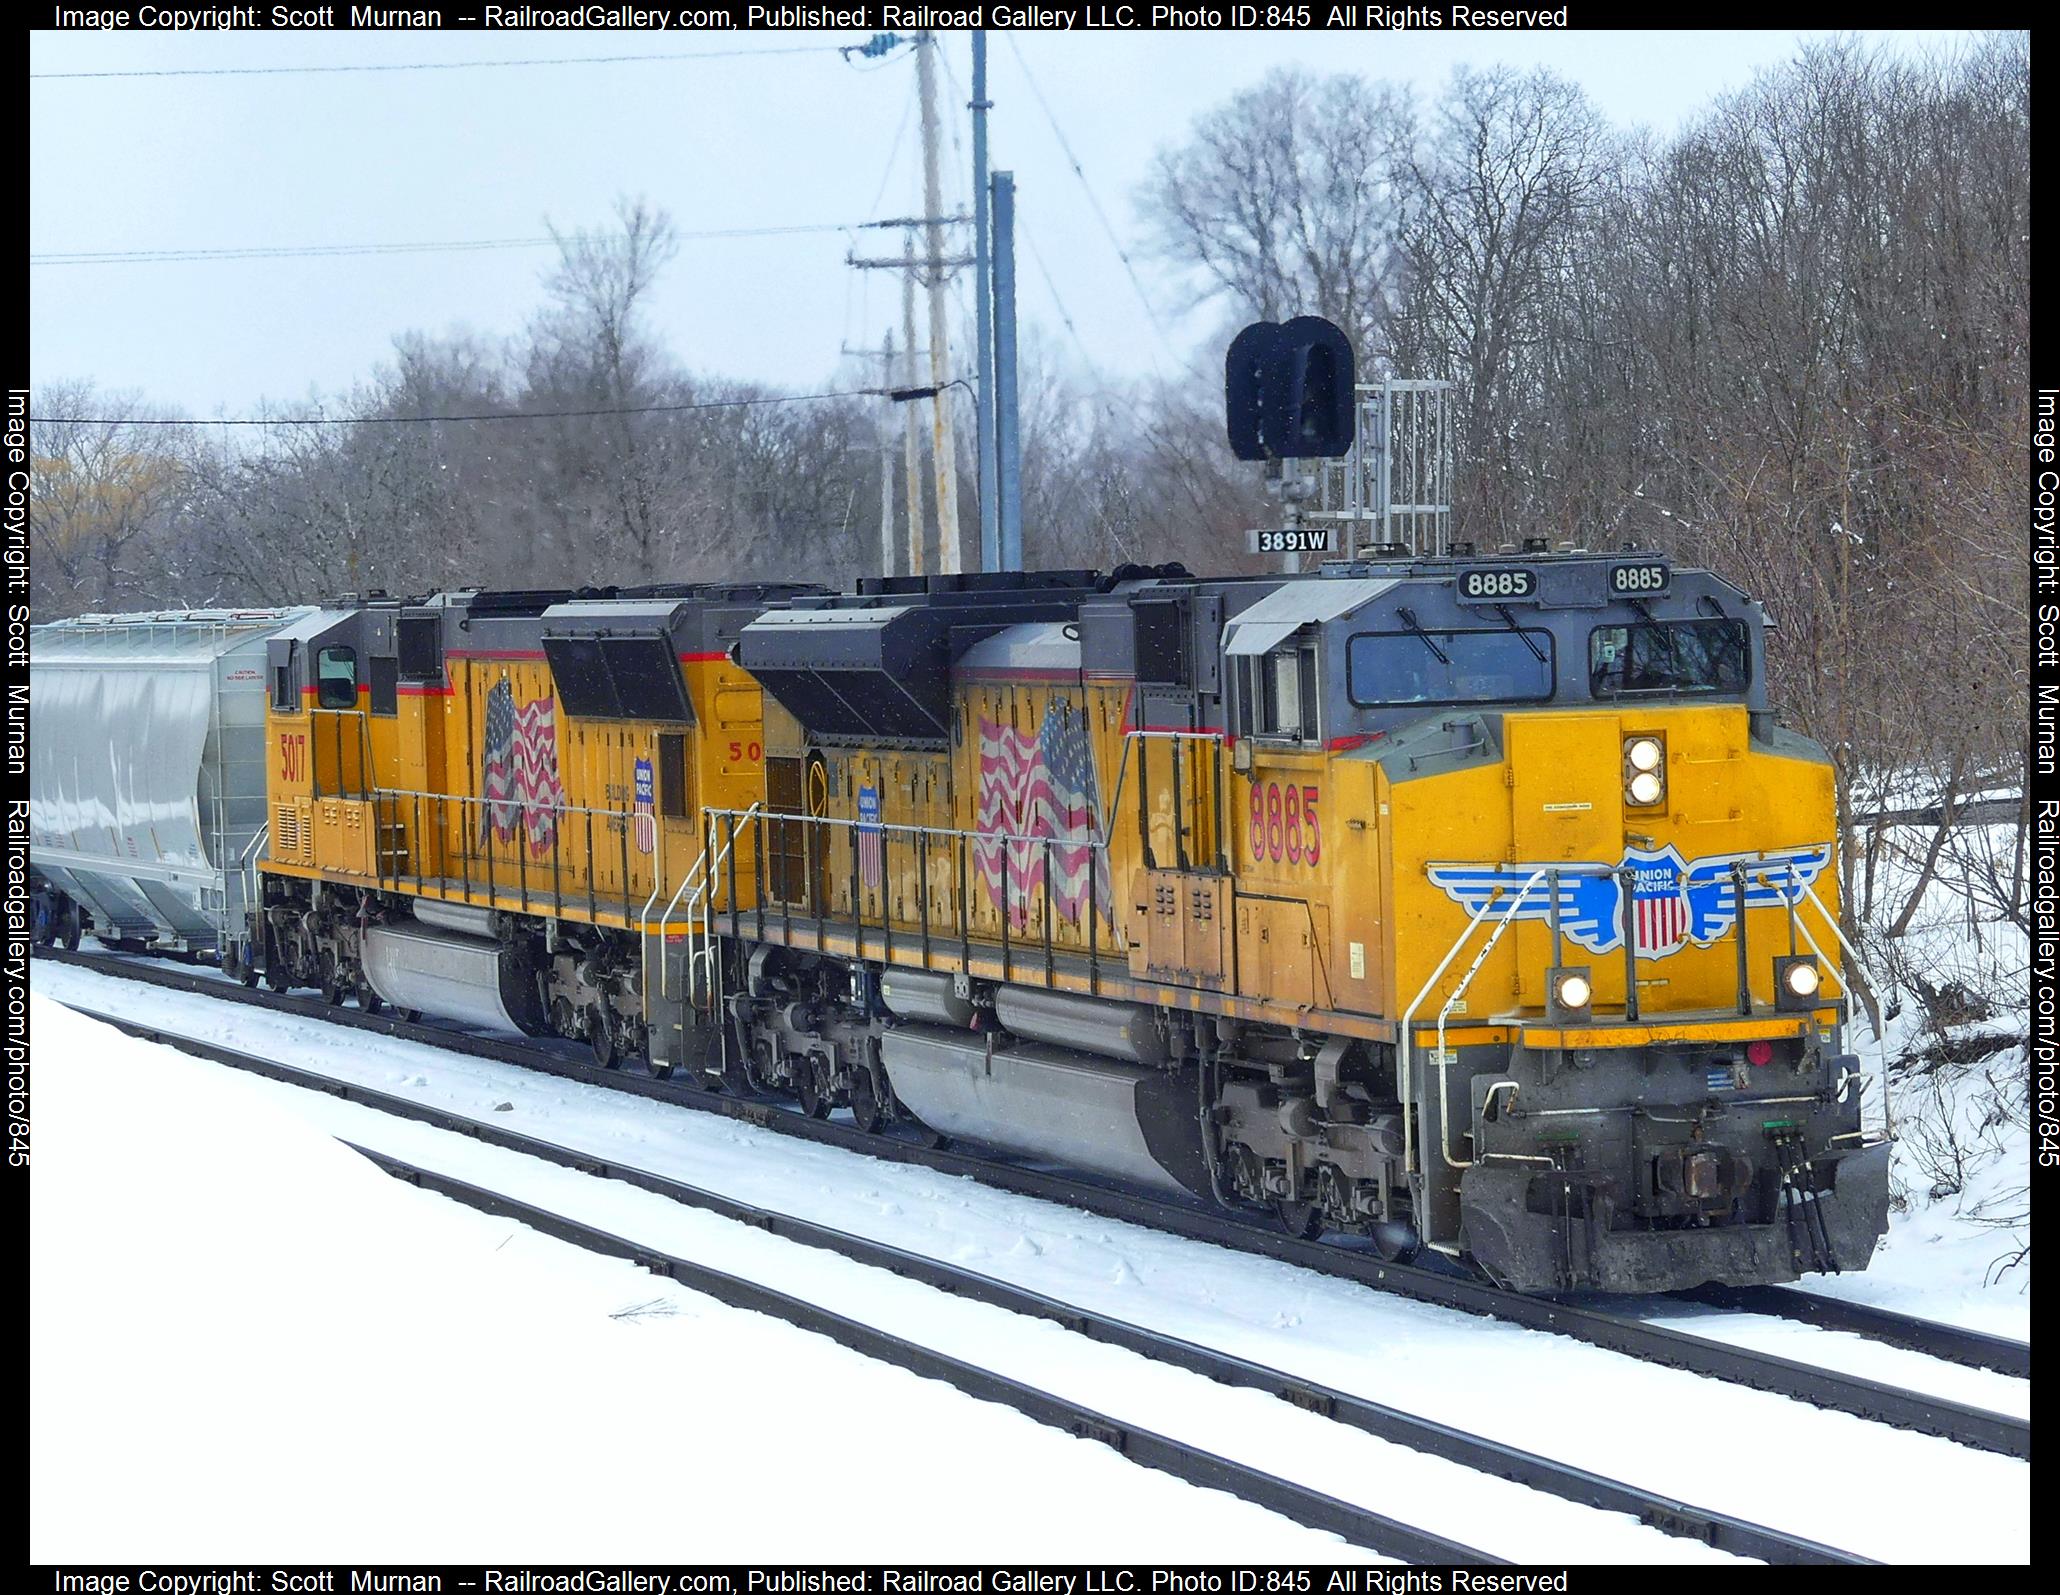 UP 8885 is a class EMD SD70ACe and  is pictured in Attica, New York, United States.  This was taken along the Southern Tier Line on the Norfolk Southern. Photo Copyright: Scott  Murnan  uploaded to Railroad Gallery on 03/15/2023. This photograph of UP 8885 was taken on Monday, March 13, 2023. All Rights Reserved. 